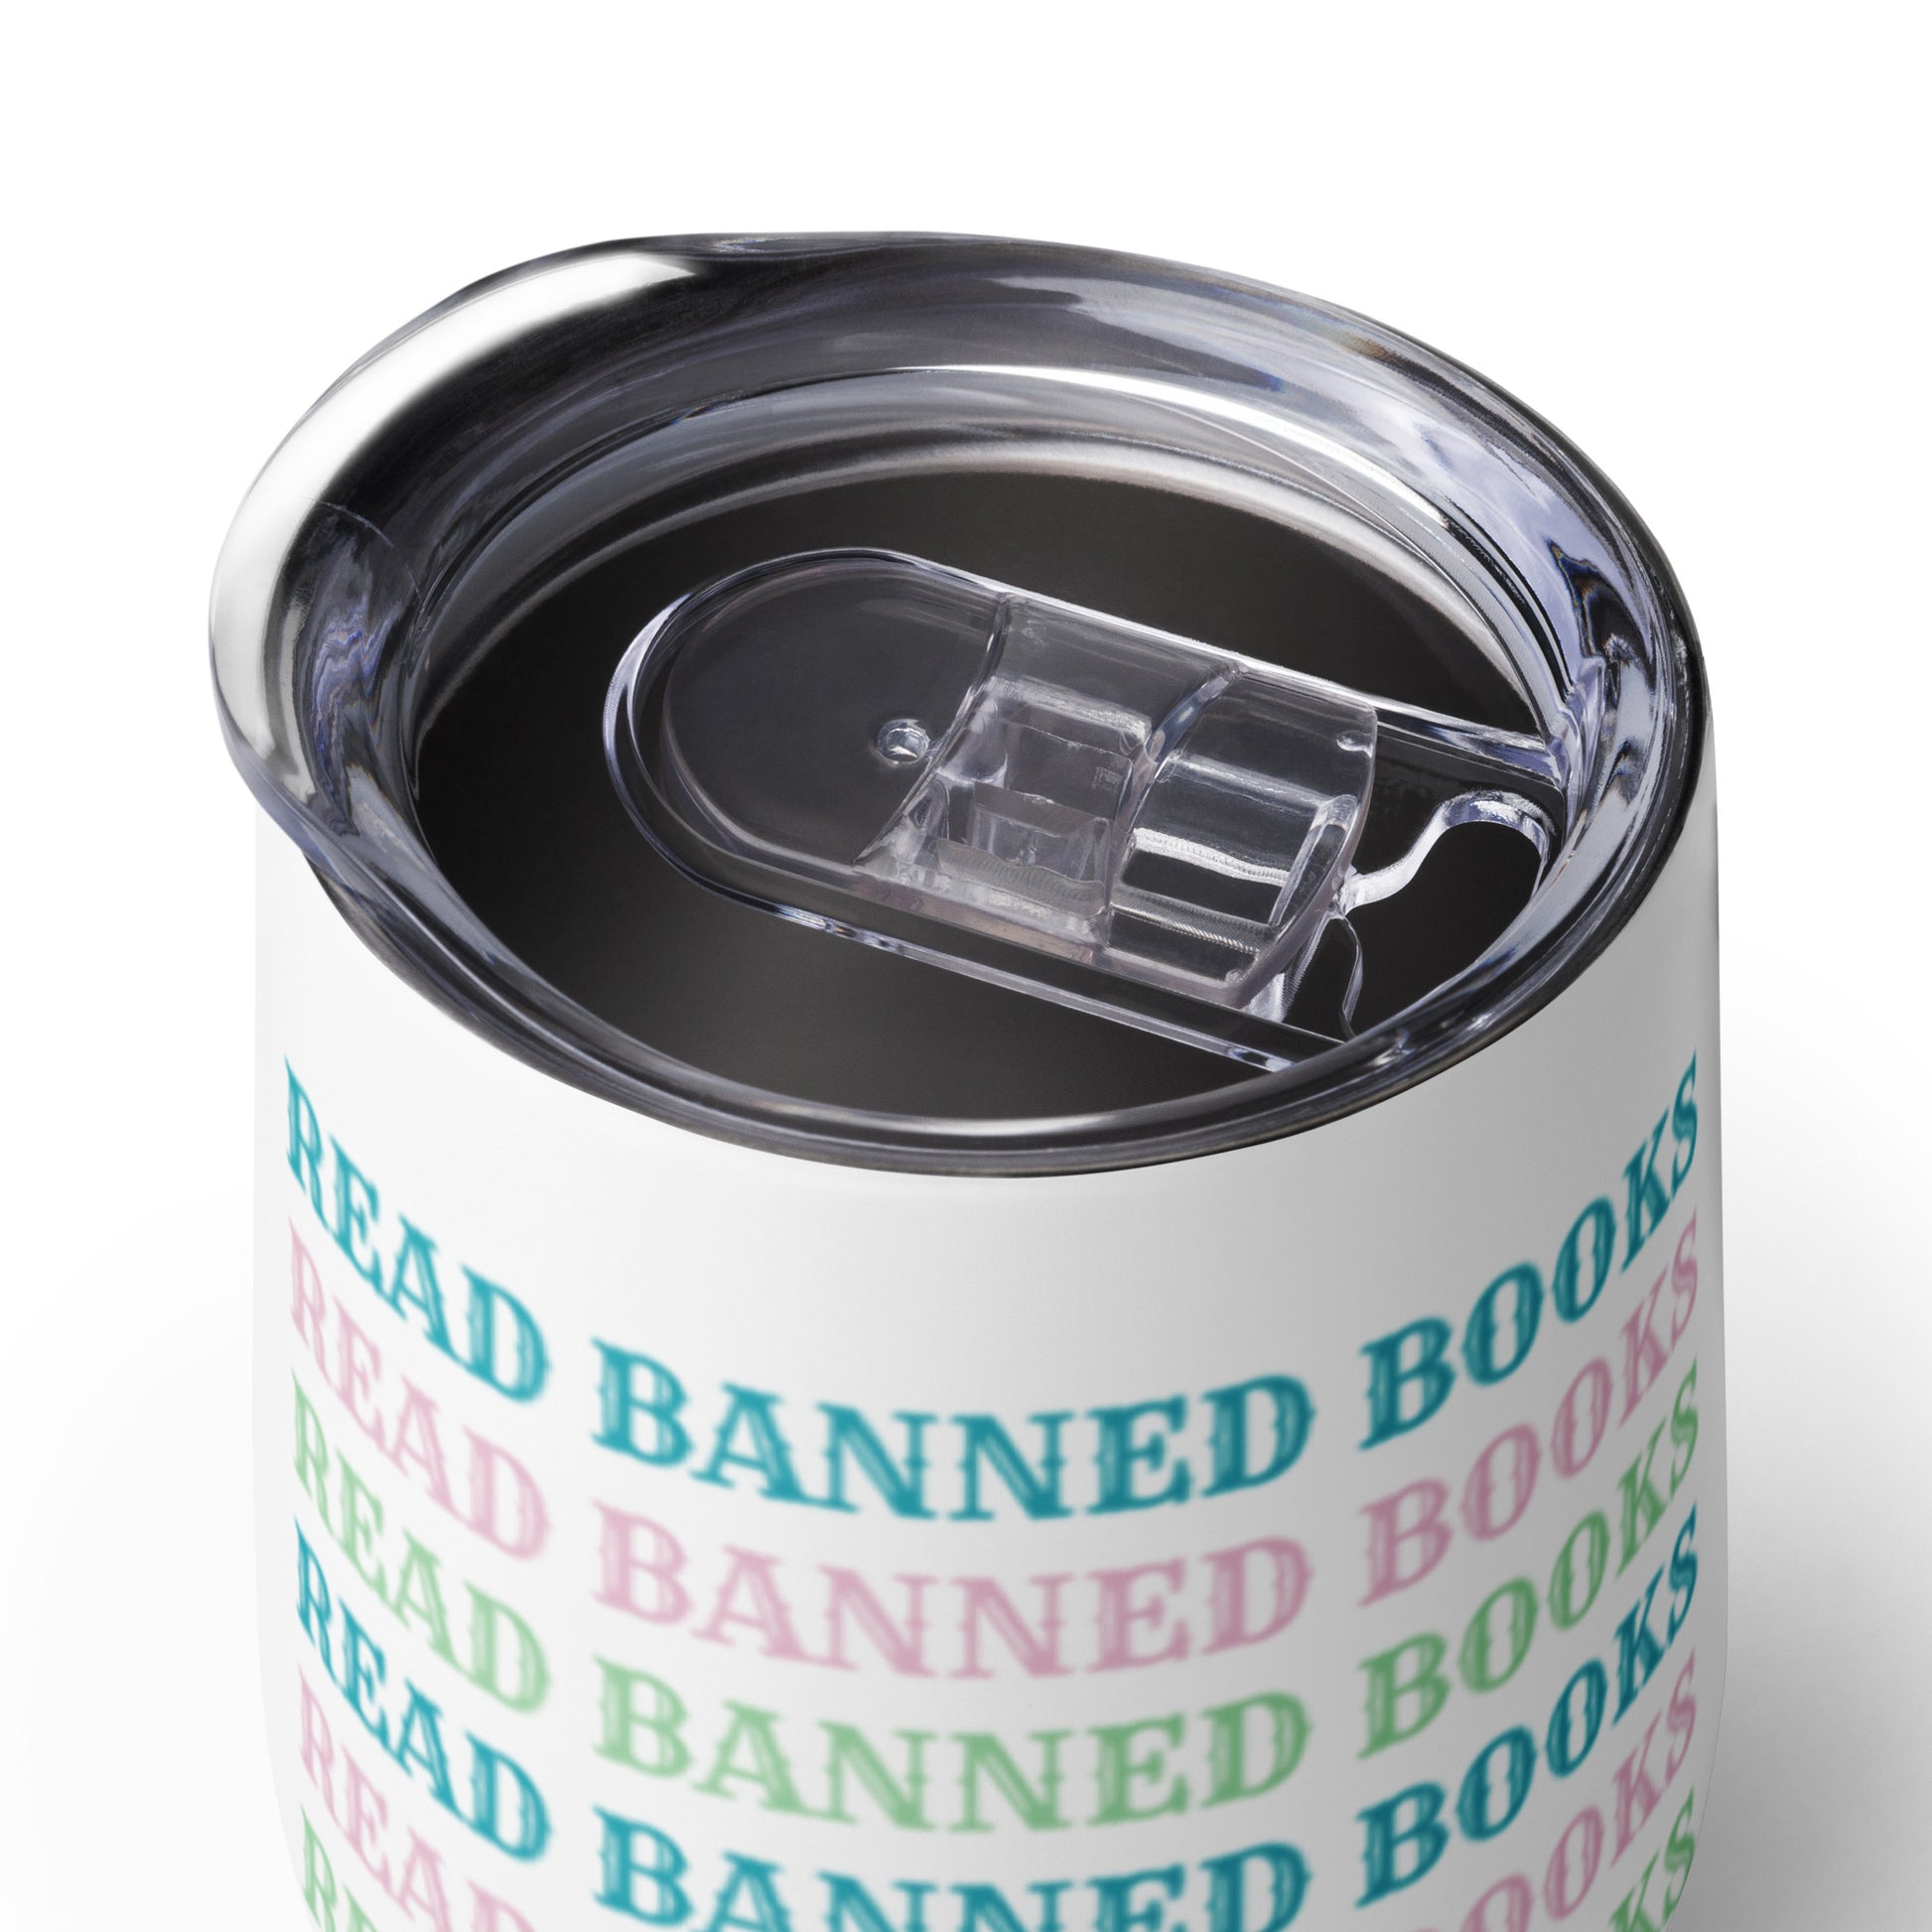 Read Banned Books Wine Tumbler - The Spinster Librarian Shop